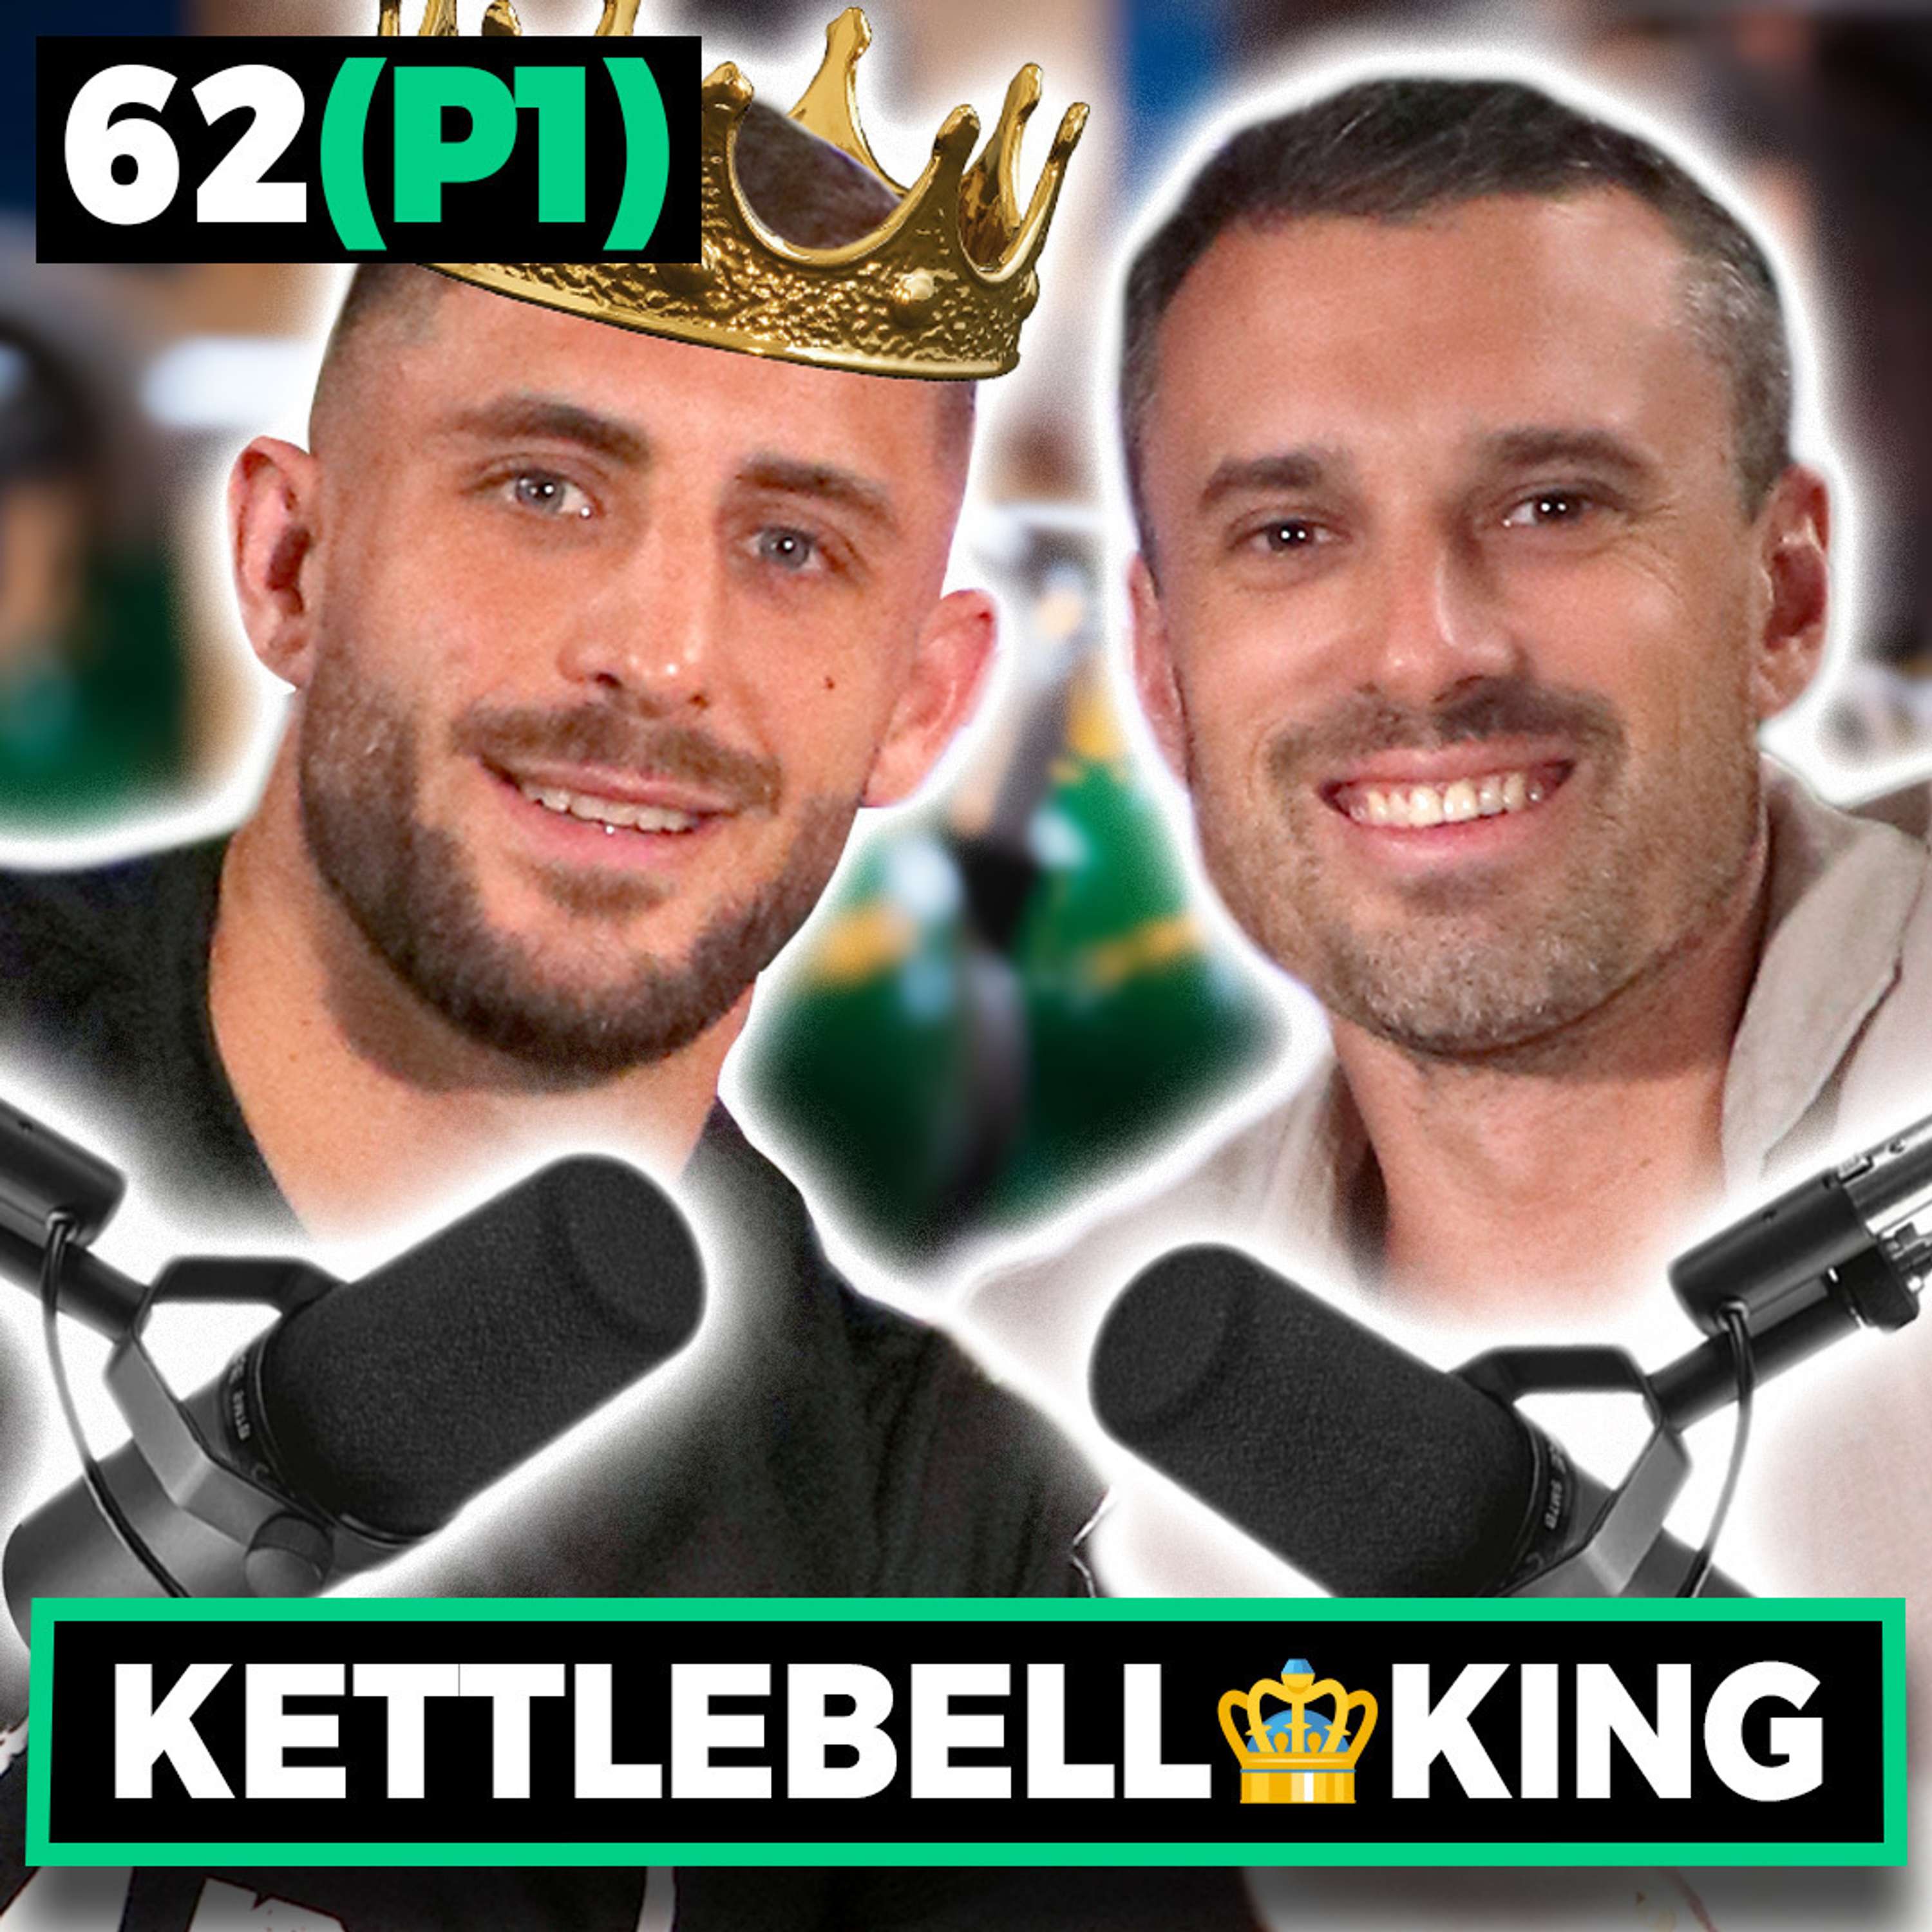 👑Kettlebell King on How To Avoid HIGH RISK Injuries❓️ || Peter Forneck (E62P1)